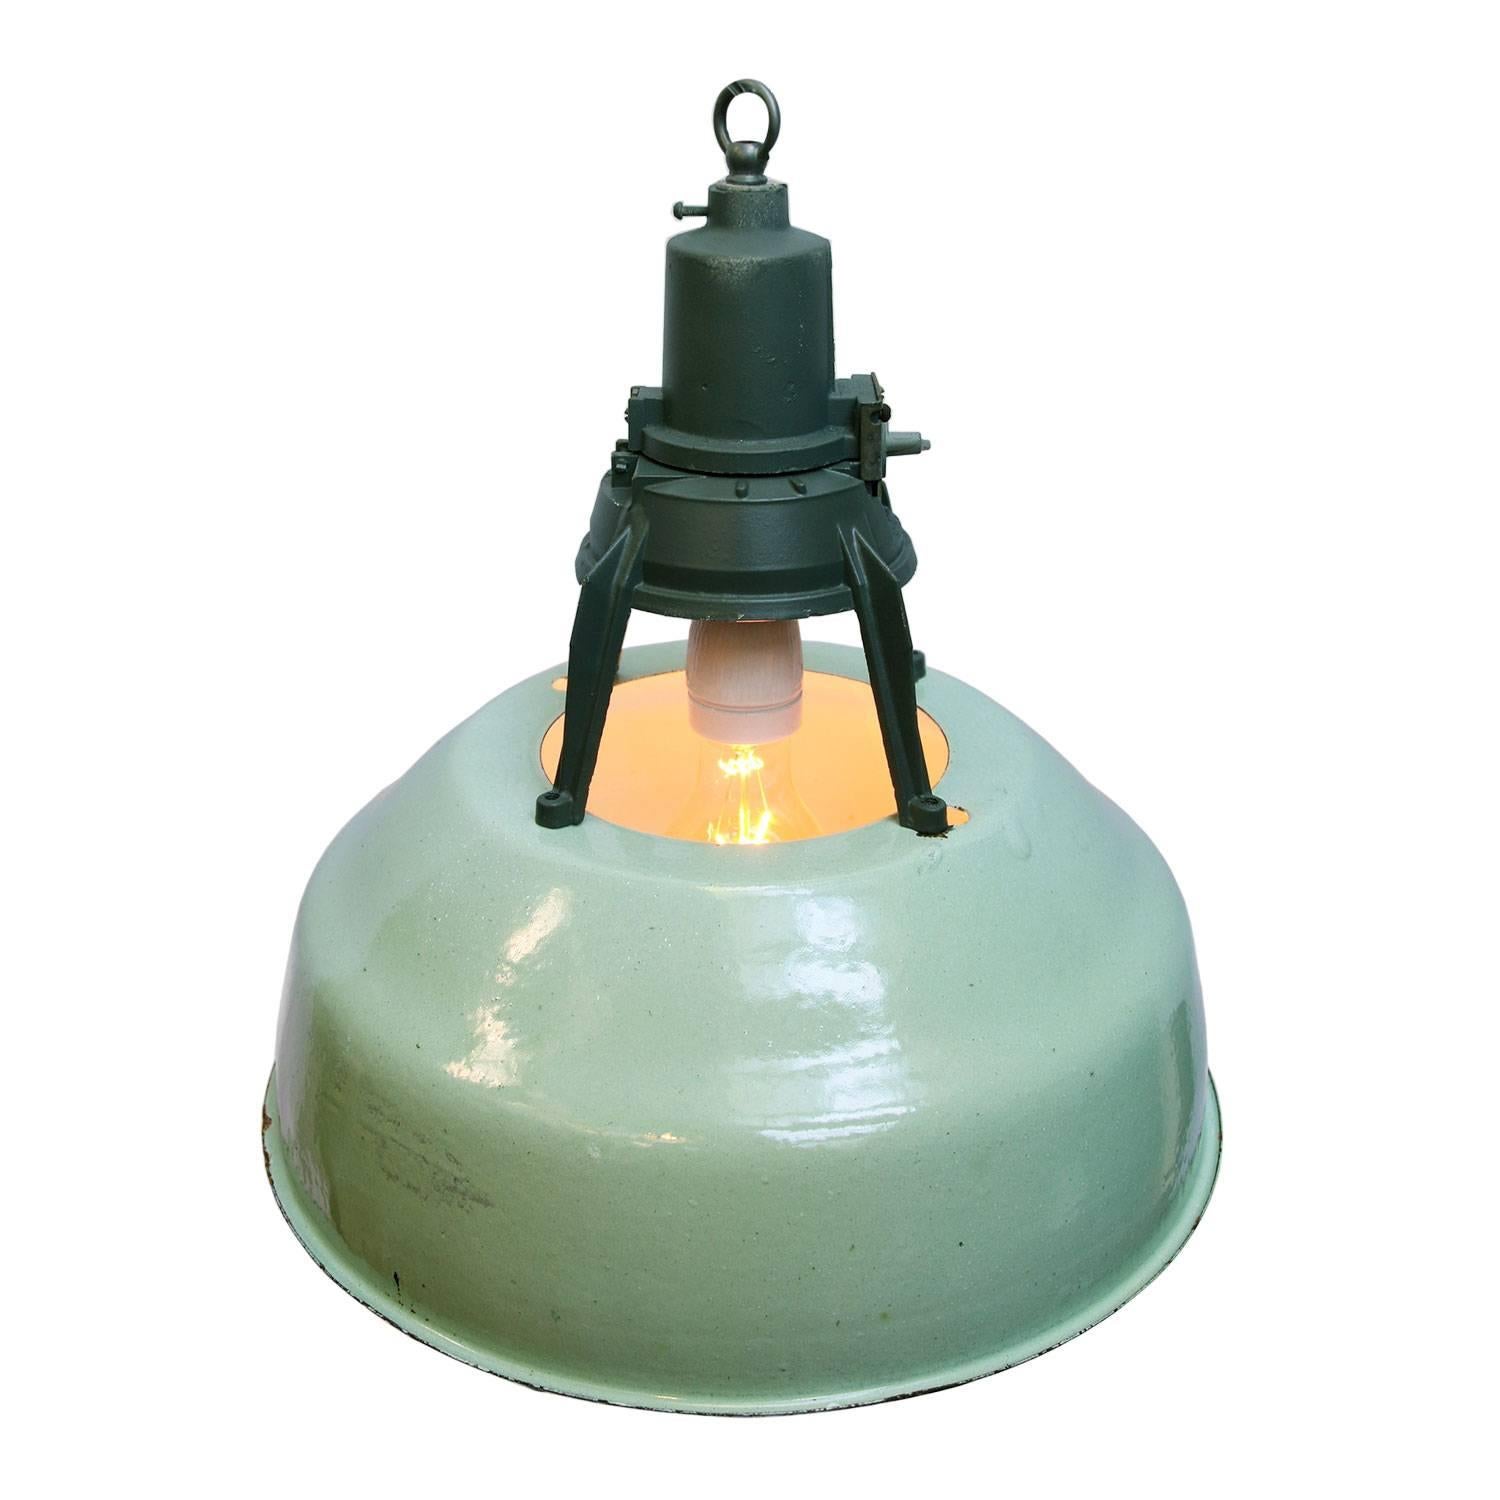 Enamel Industrial pendant. Green enamel shade, white inside.
Dark grey/green cast aluminium top.

All lamps have been made suitable by international standards for incandescent light bulbs, energy-efficient and LED bulbs with an E26/E27 socket,